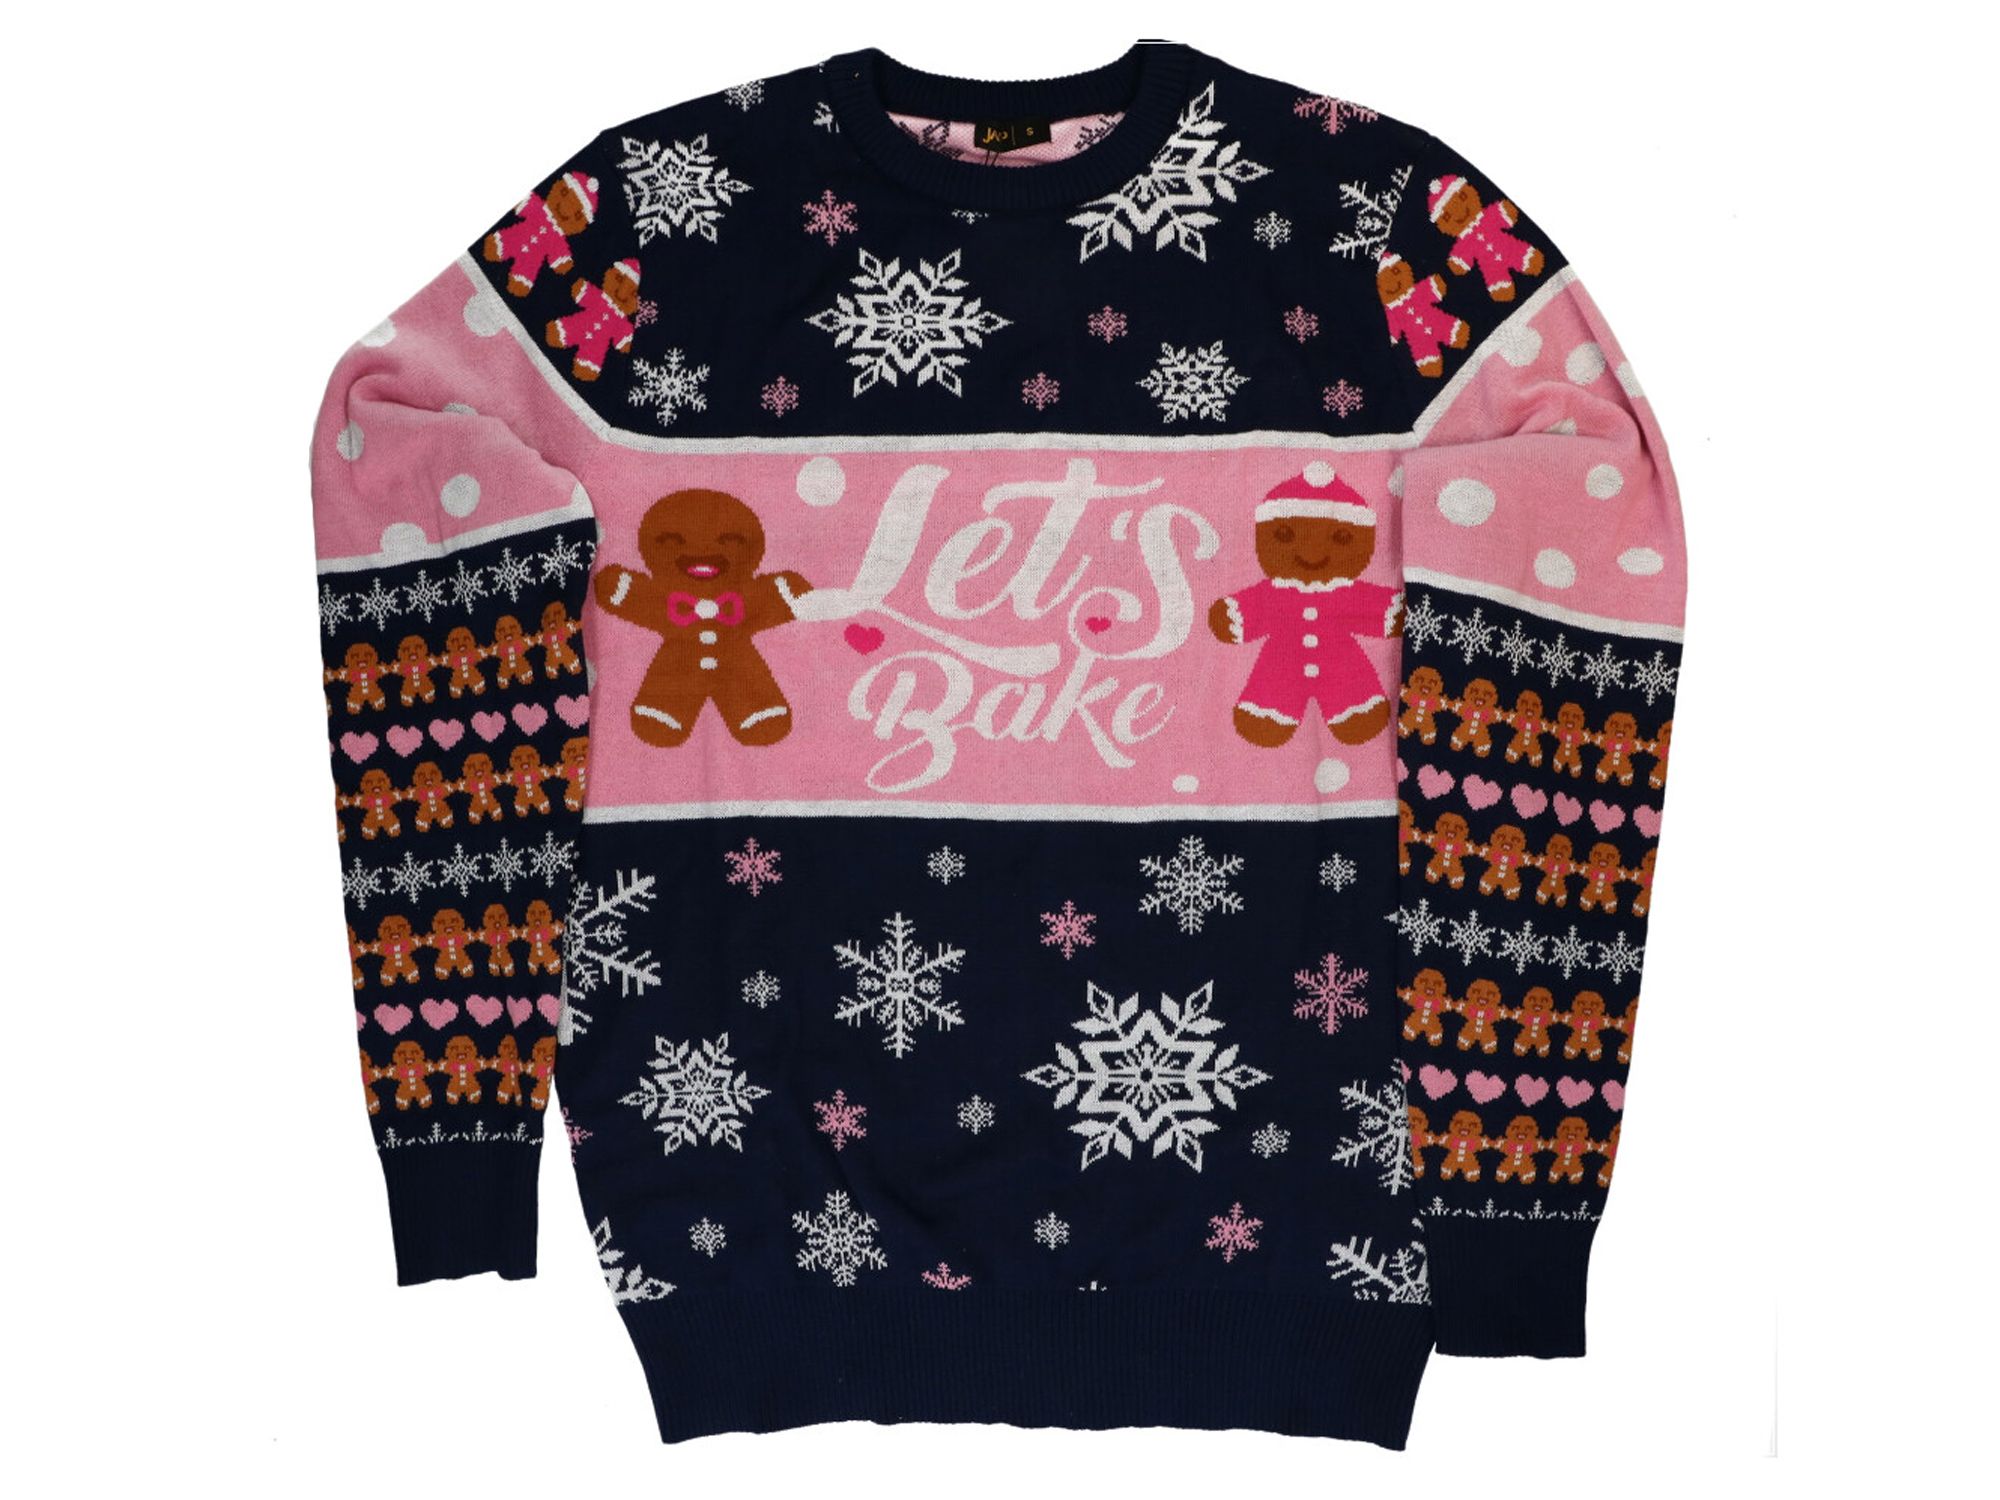 Christmas Sweater "Let's Bake" (S - XXL)